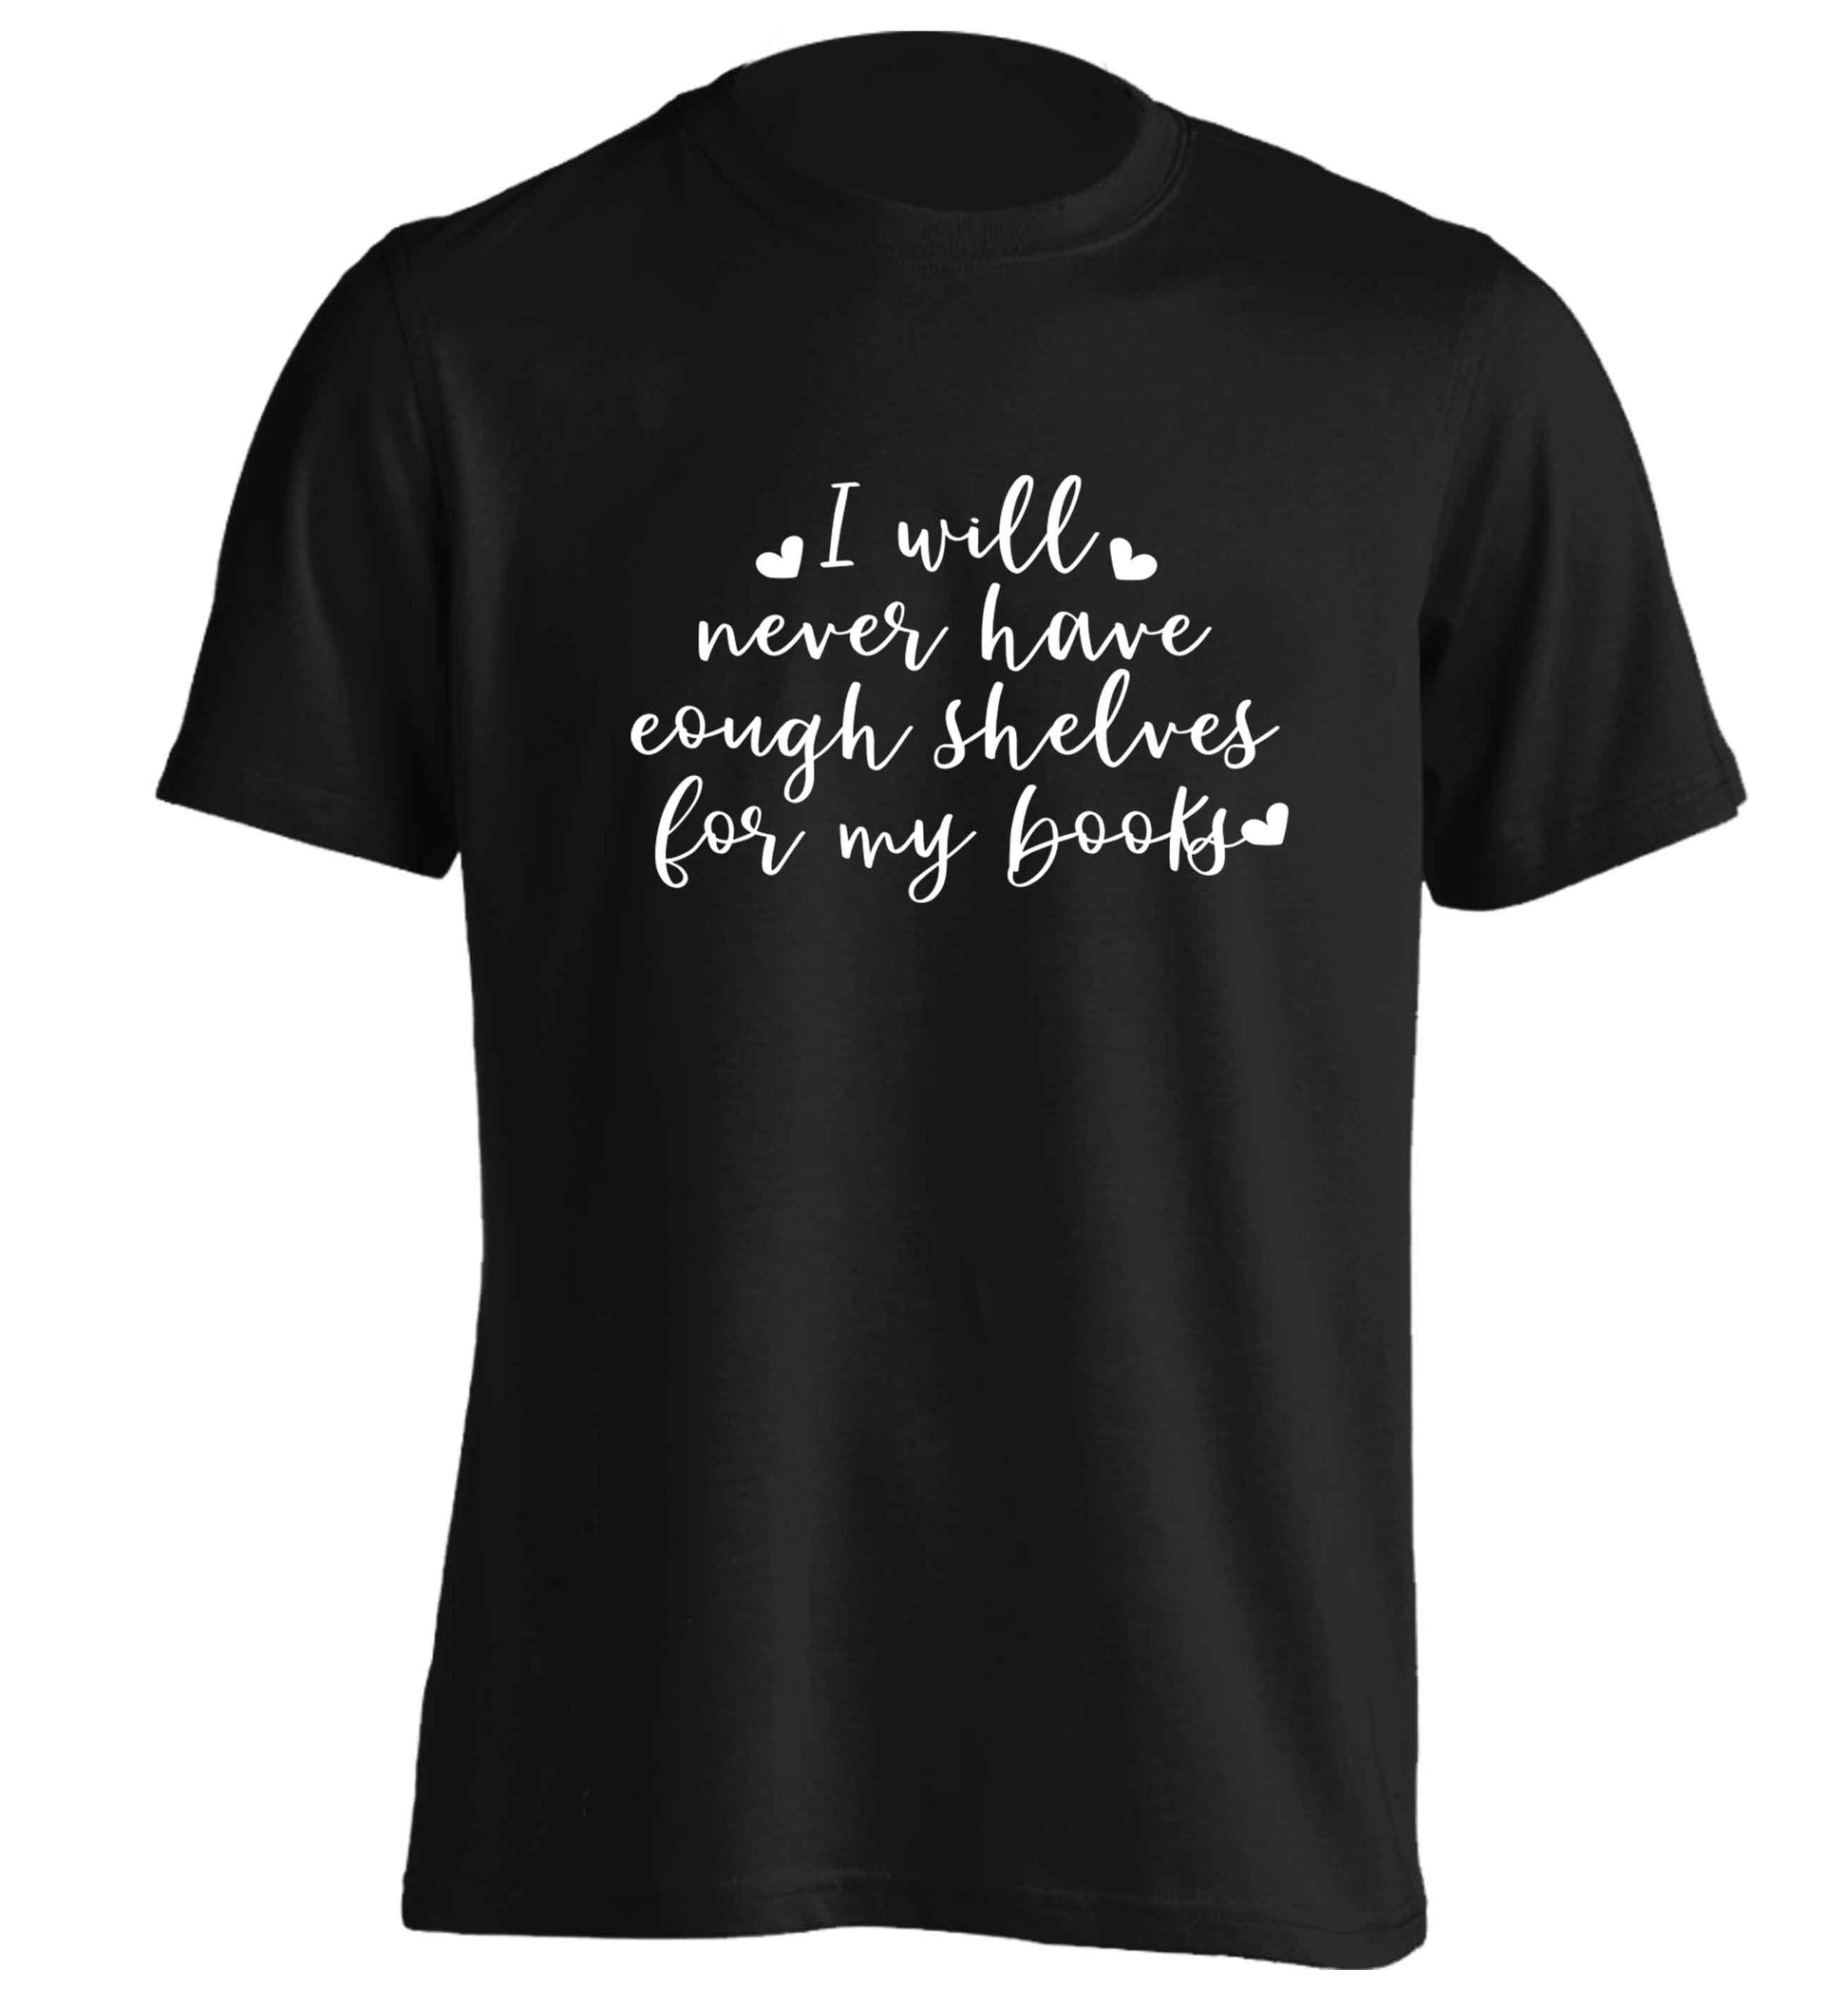 I will never have enough shelves for my books adults unisex black Tshirt 2XL